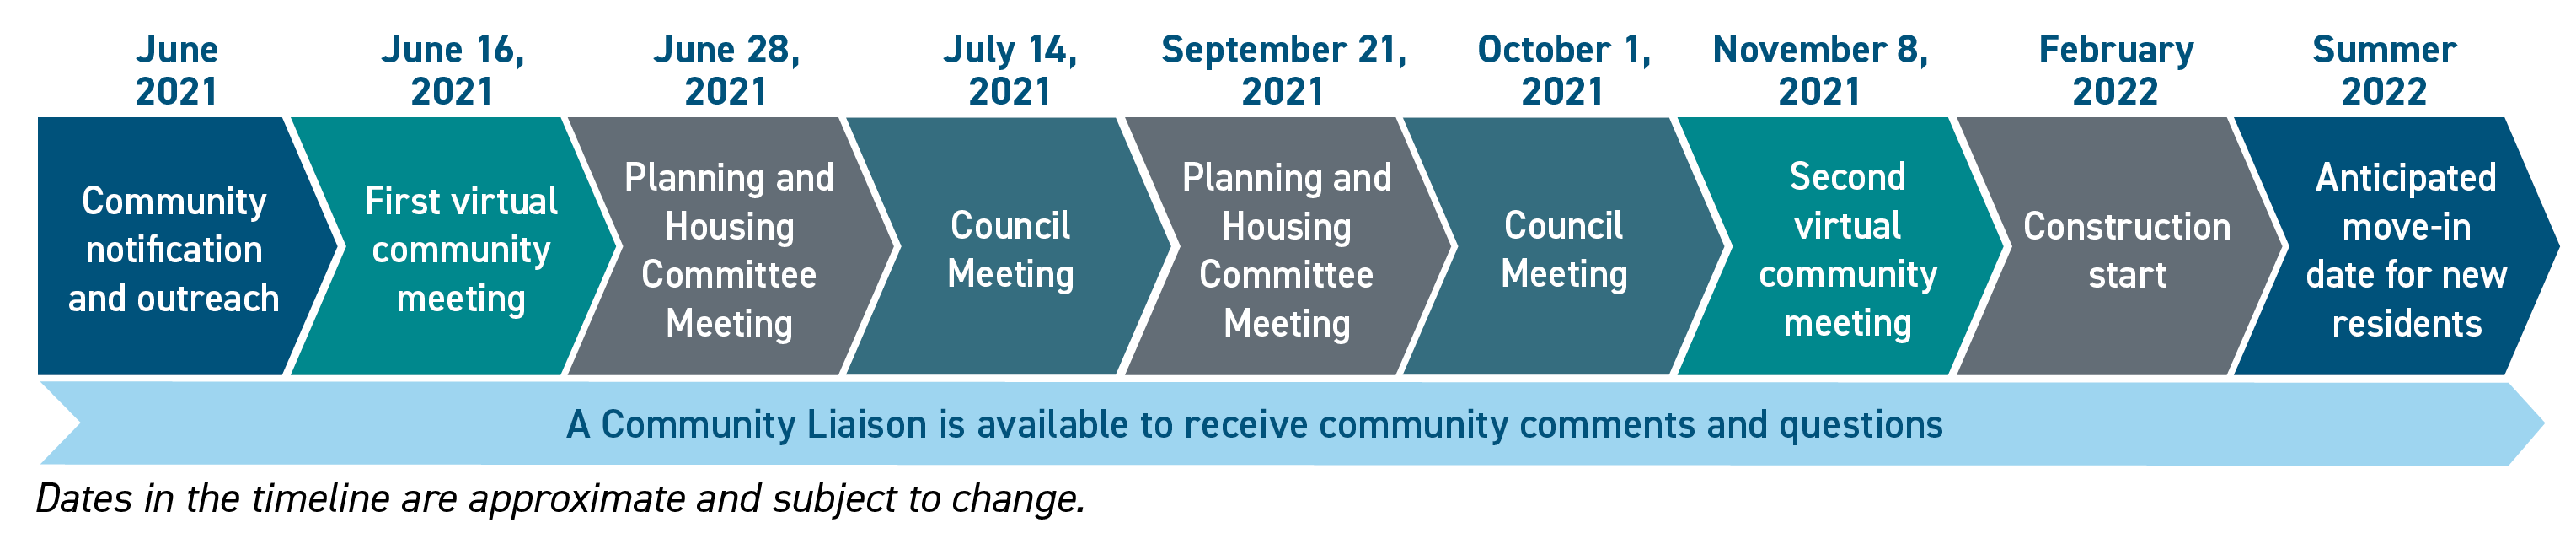 This image shows a timeline for the project - starting in June 2021 with community notification and outreach, first virtual community meeting, and the first Planning and Housing Committee meeting. The second virtual community meeting took place in November 2021. Construction start is scheduled for February 2022 and in summer 2022, new residents are expected to move in. 